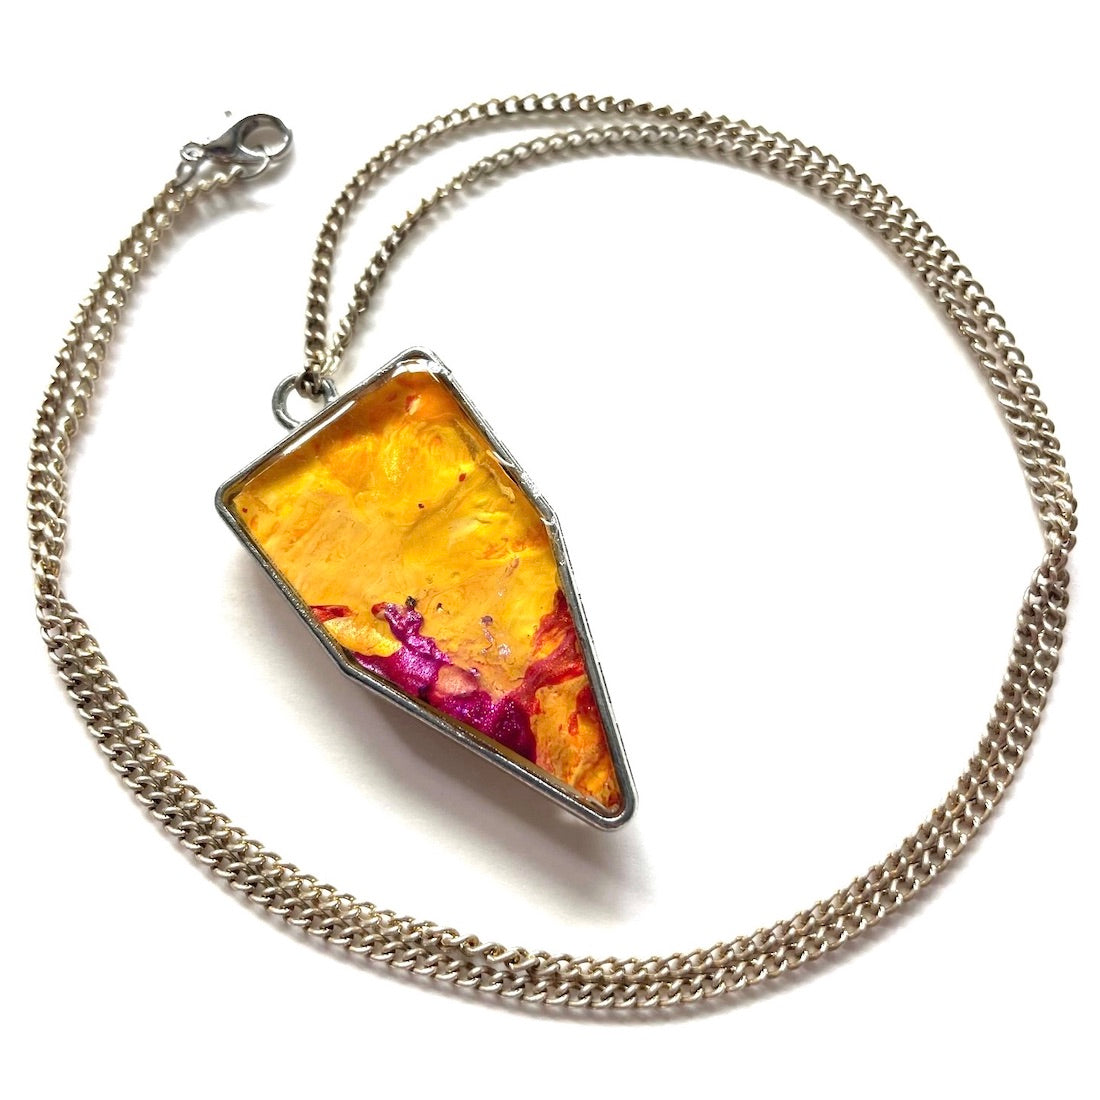 recycled art and jewelry from Carini Arts